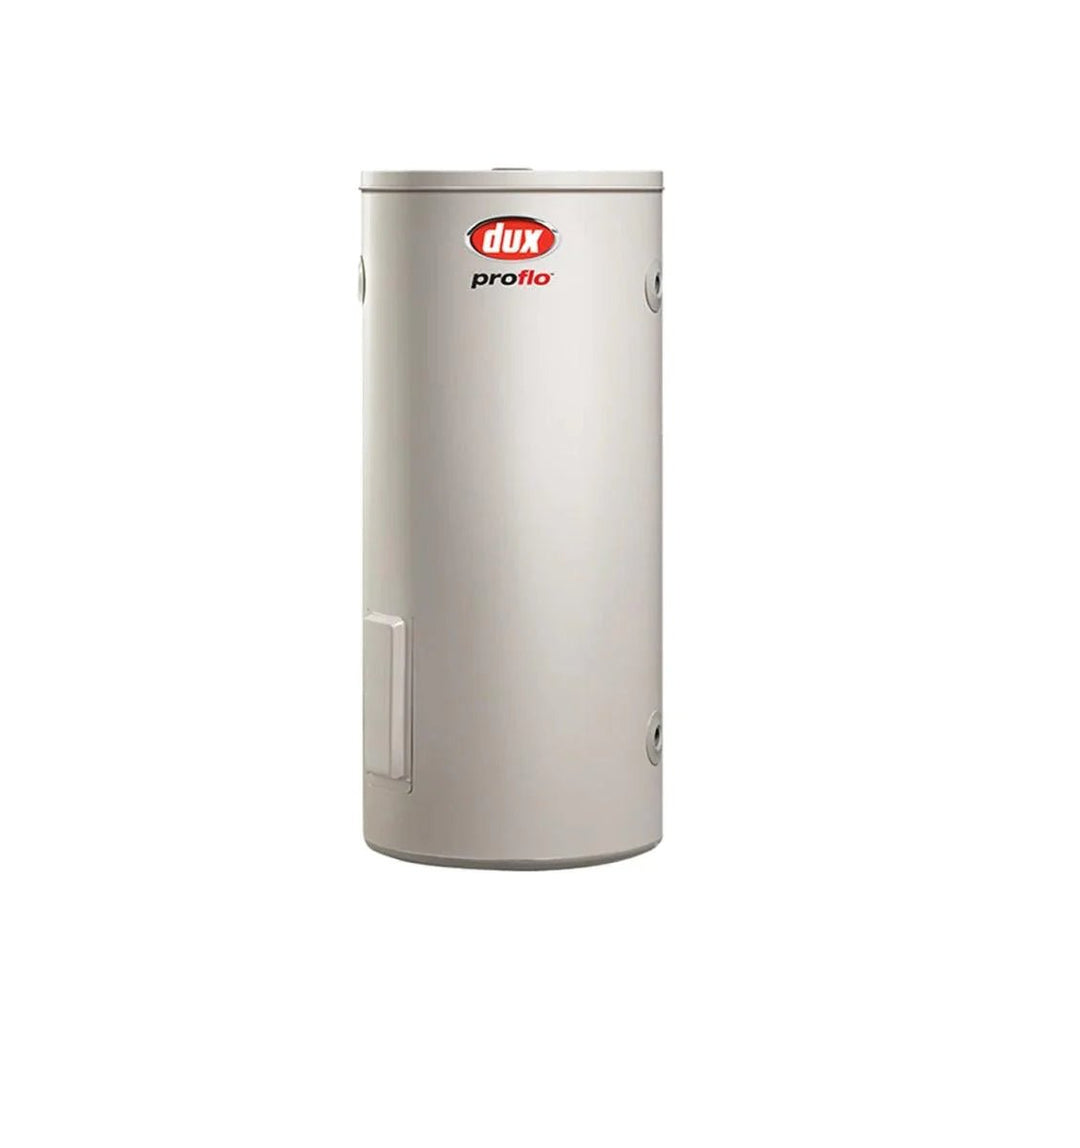 Critical Review - Dux Proflo Series Electric Hot Water Systems - JR Gas and Water